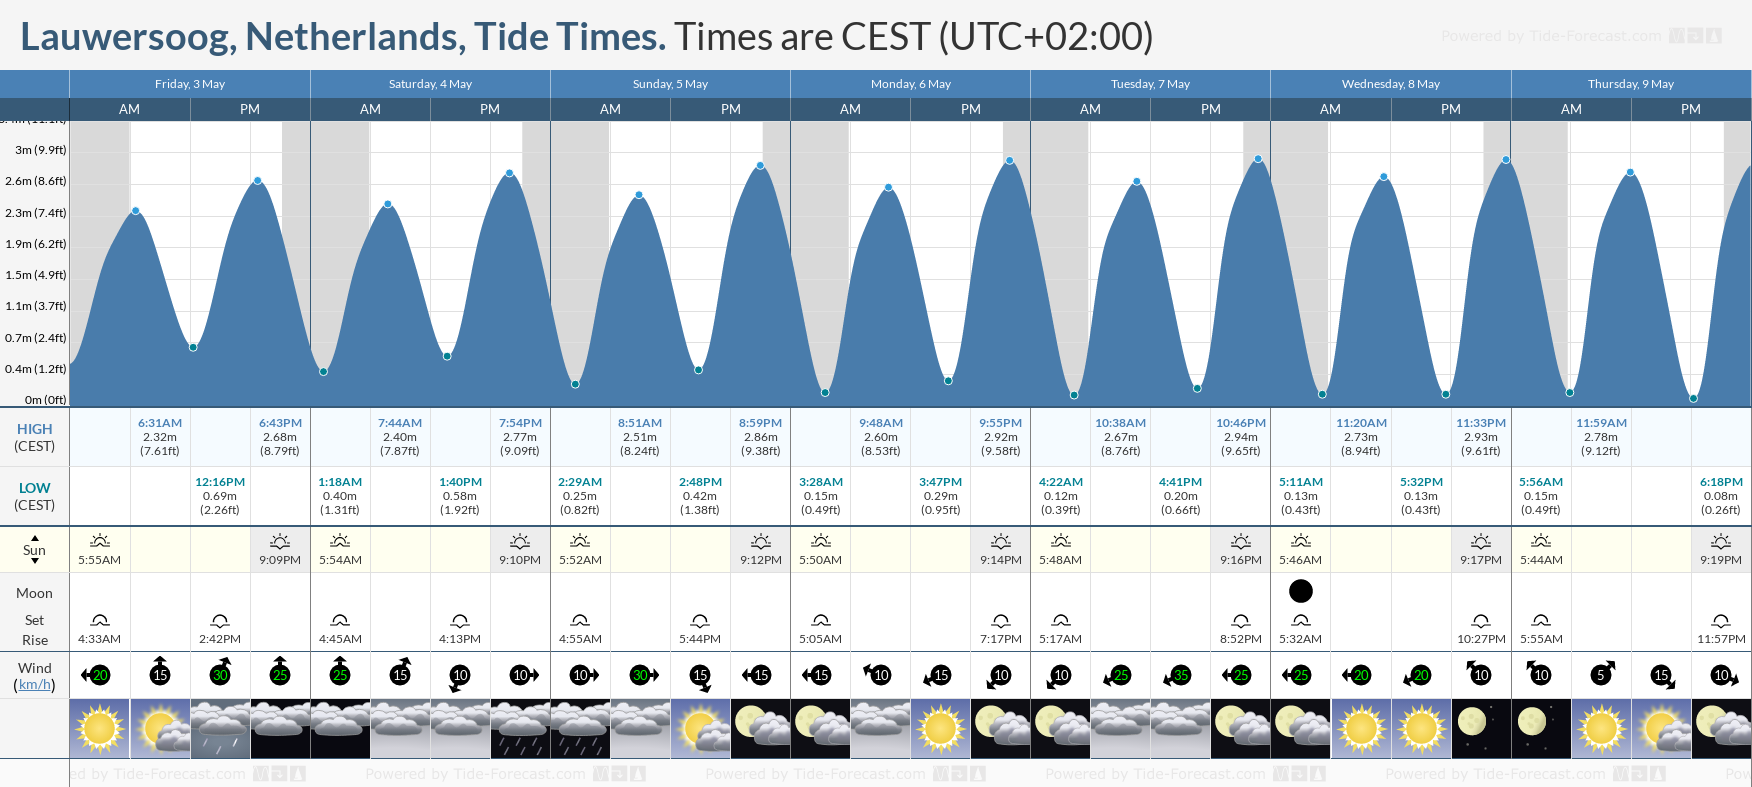 Lauwersoog, Netherlands Tide Chart including high and low tide tide times for the next 7 days